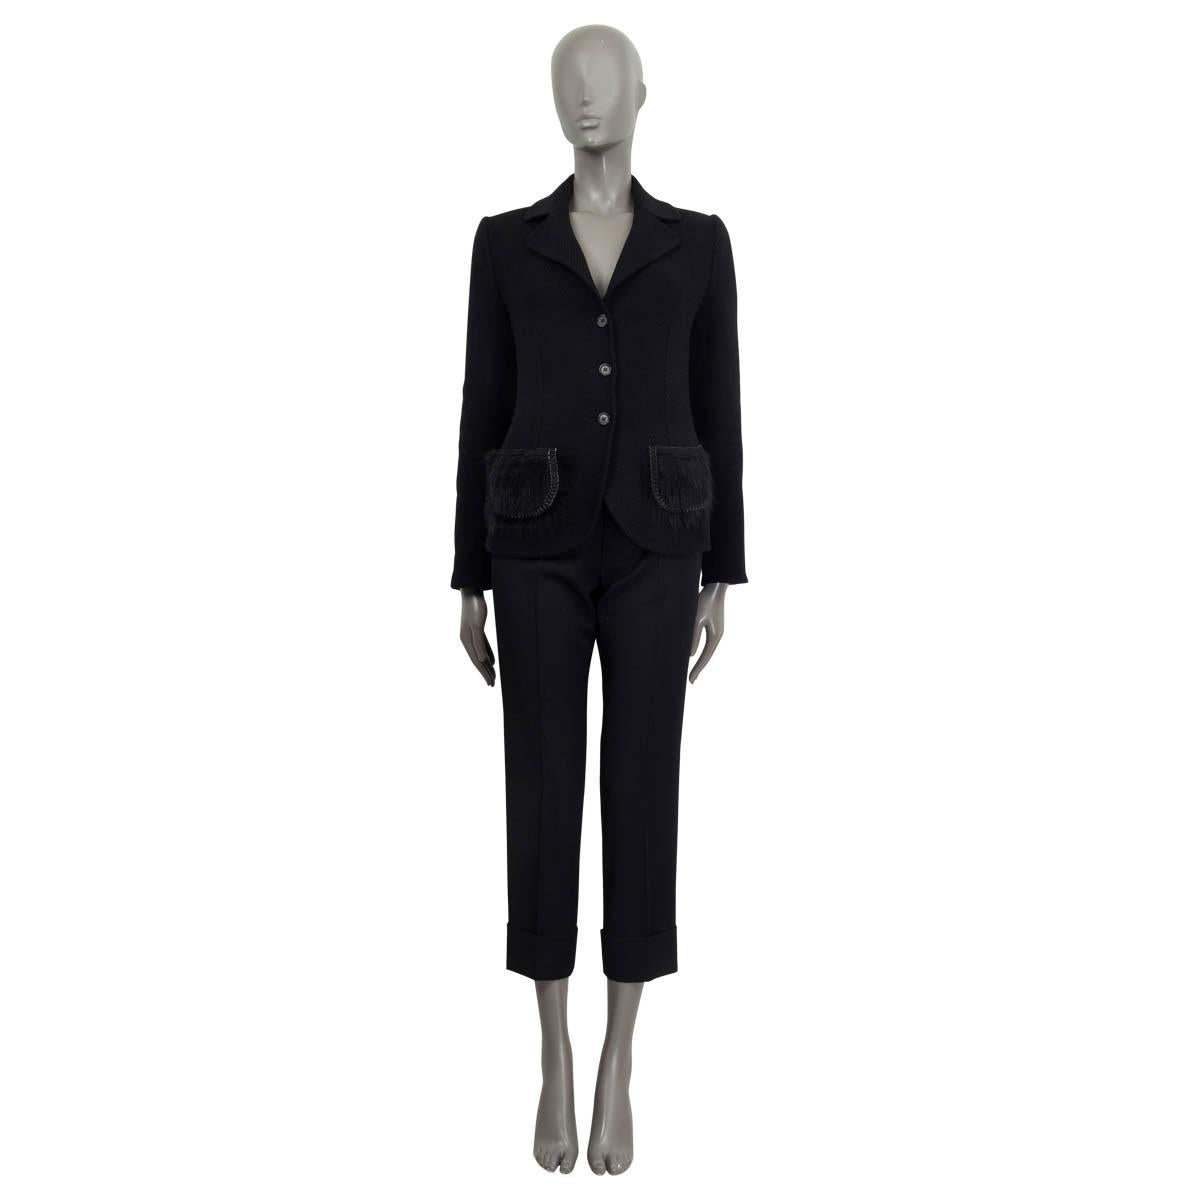 100% authentic Prada blazer in black wool (100%). Features padded shoulders and two fur and chain embellished pockets on the front. Opens with three black buttons on the front. Unlined. Has been worn and is in excellent condition.

Measurements
Tag